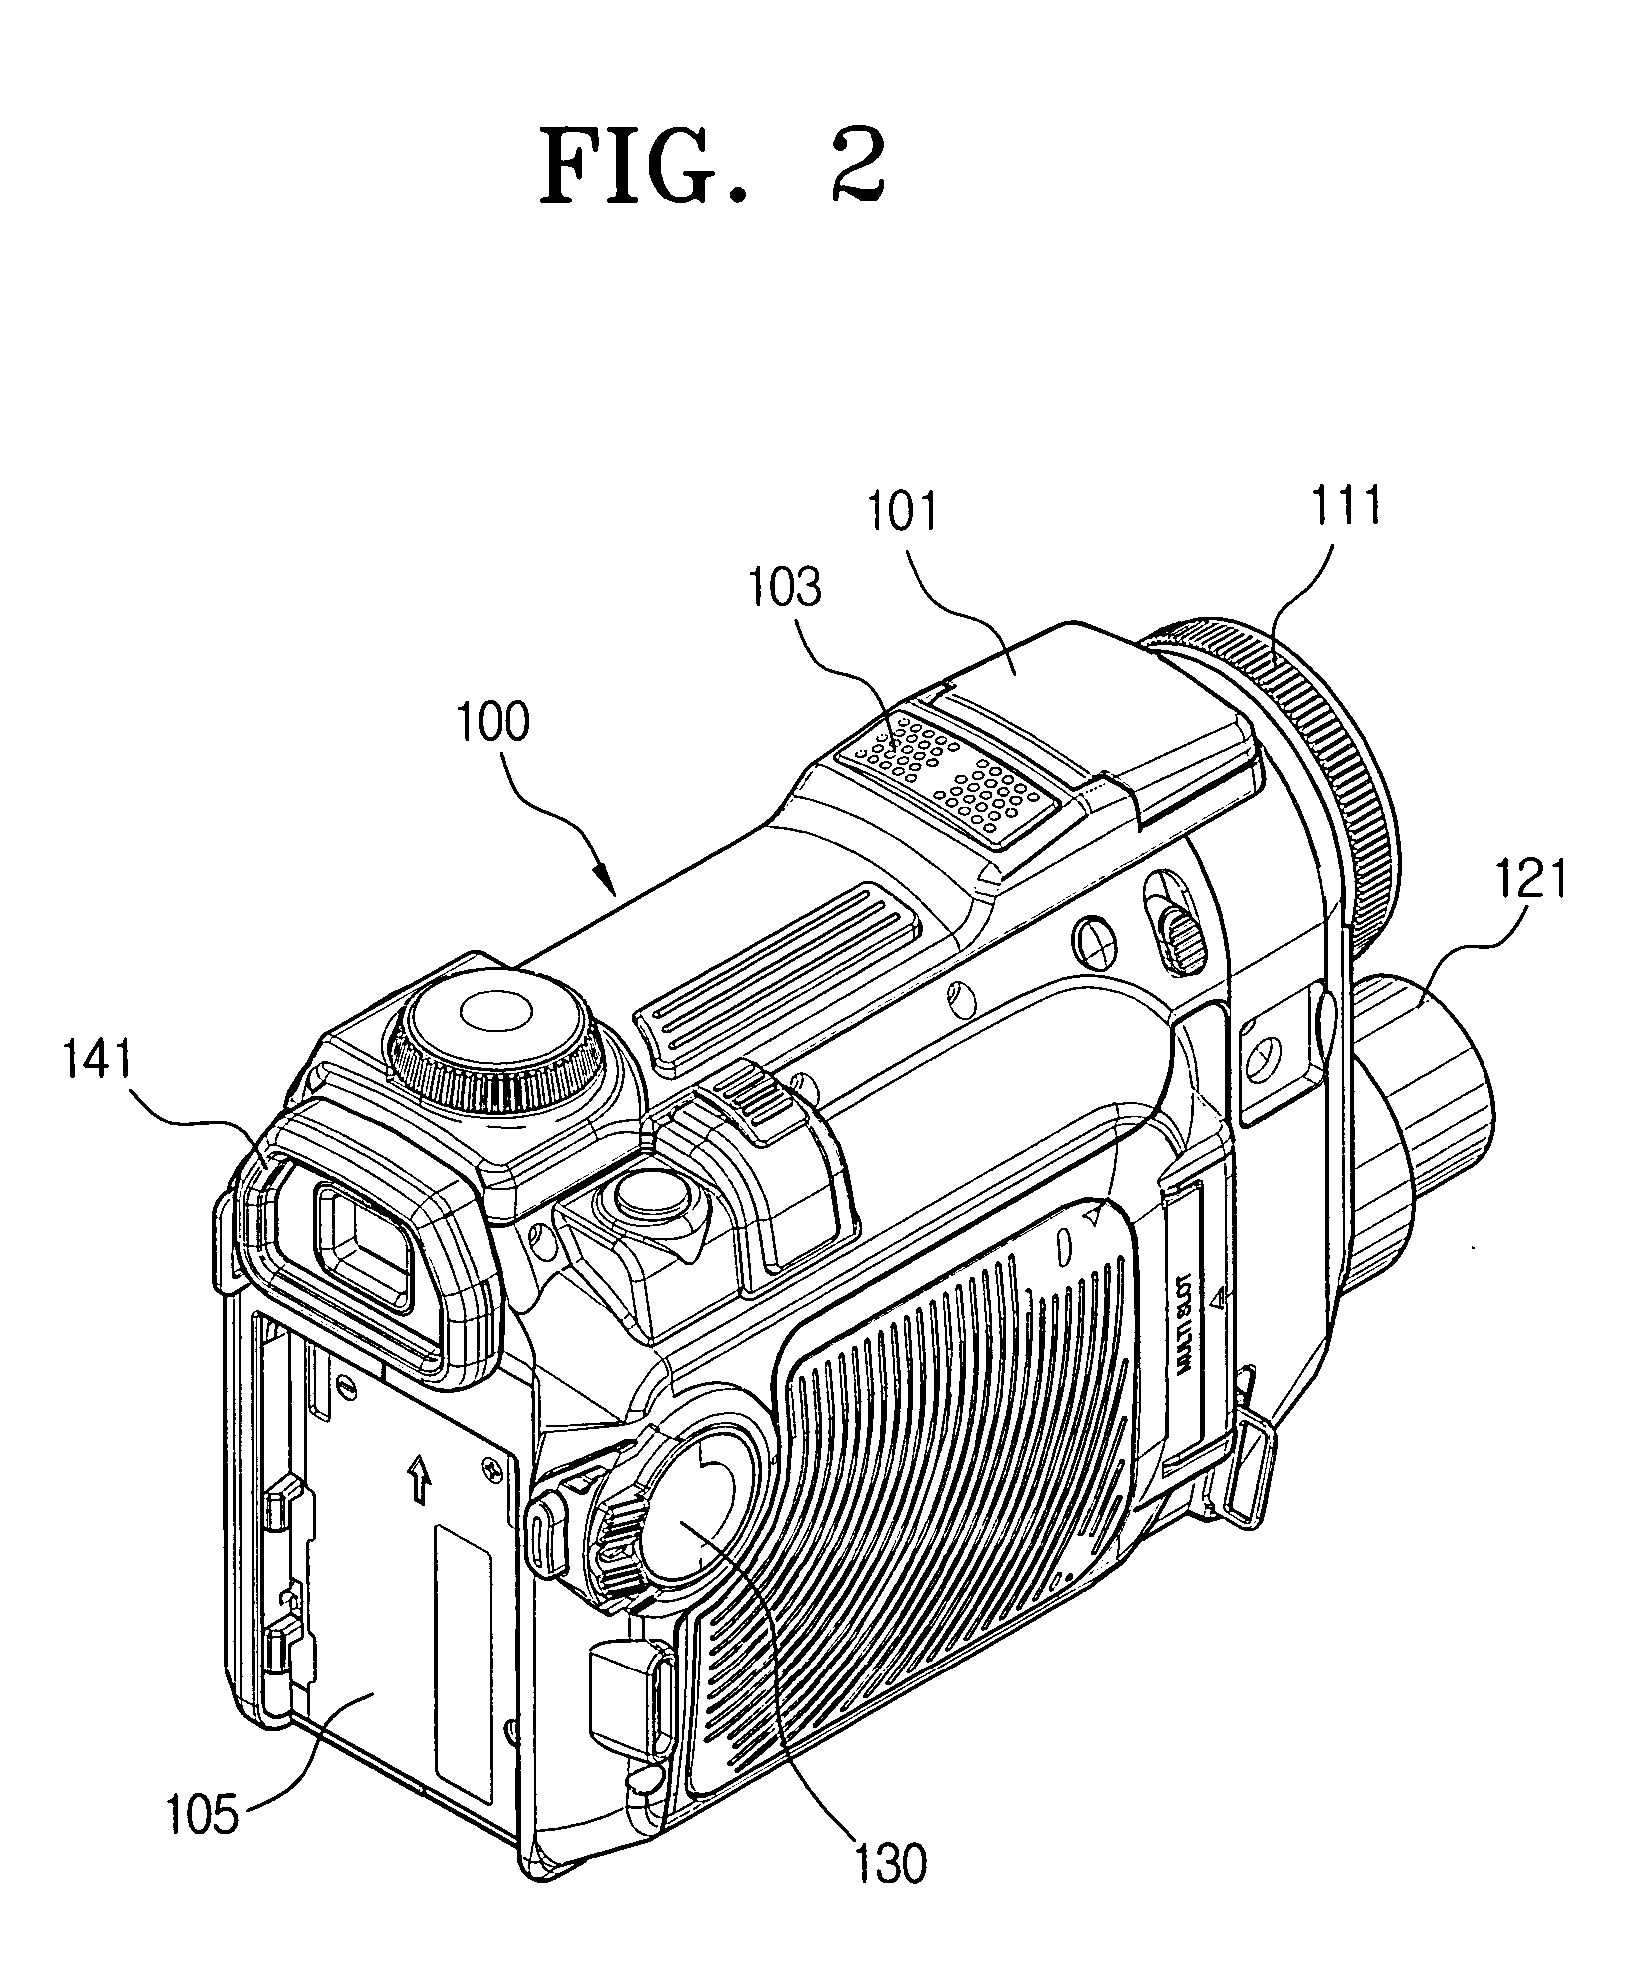 Image photographing apparatus and method